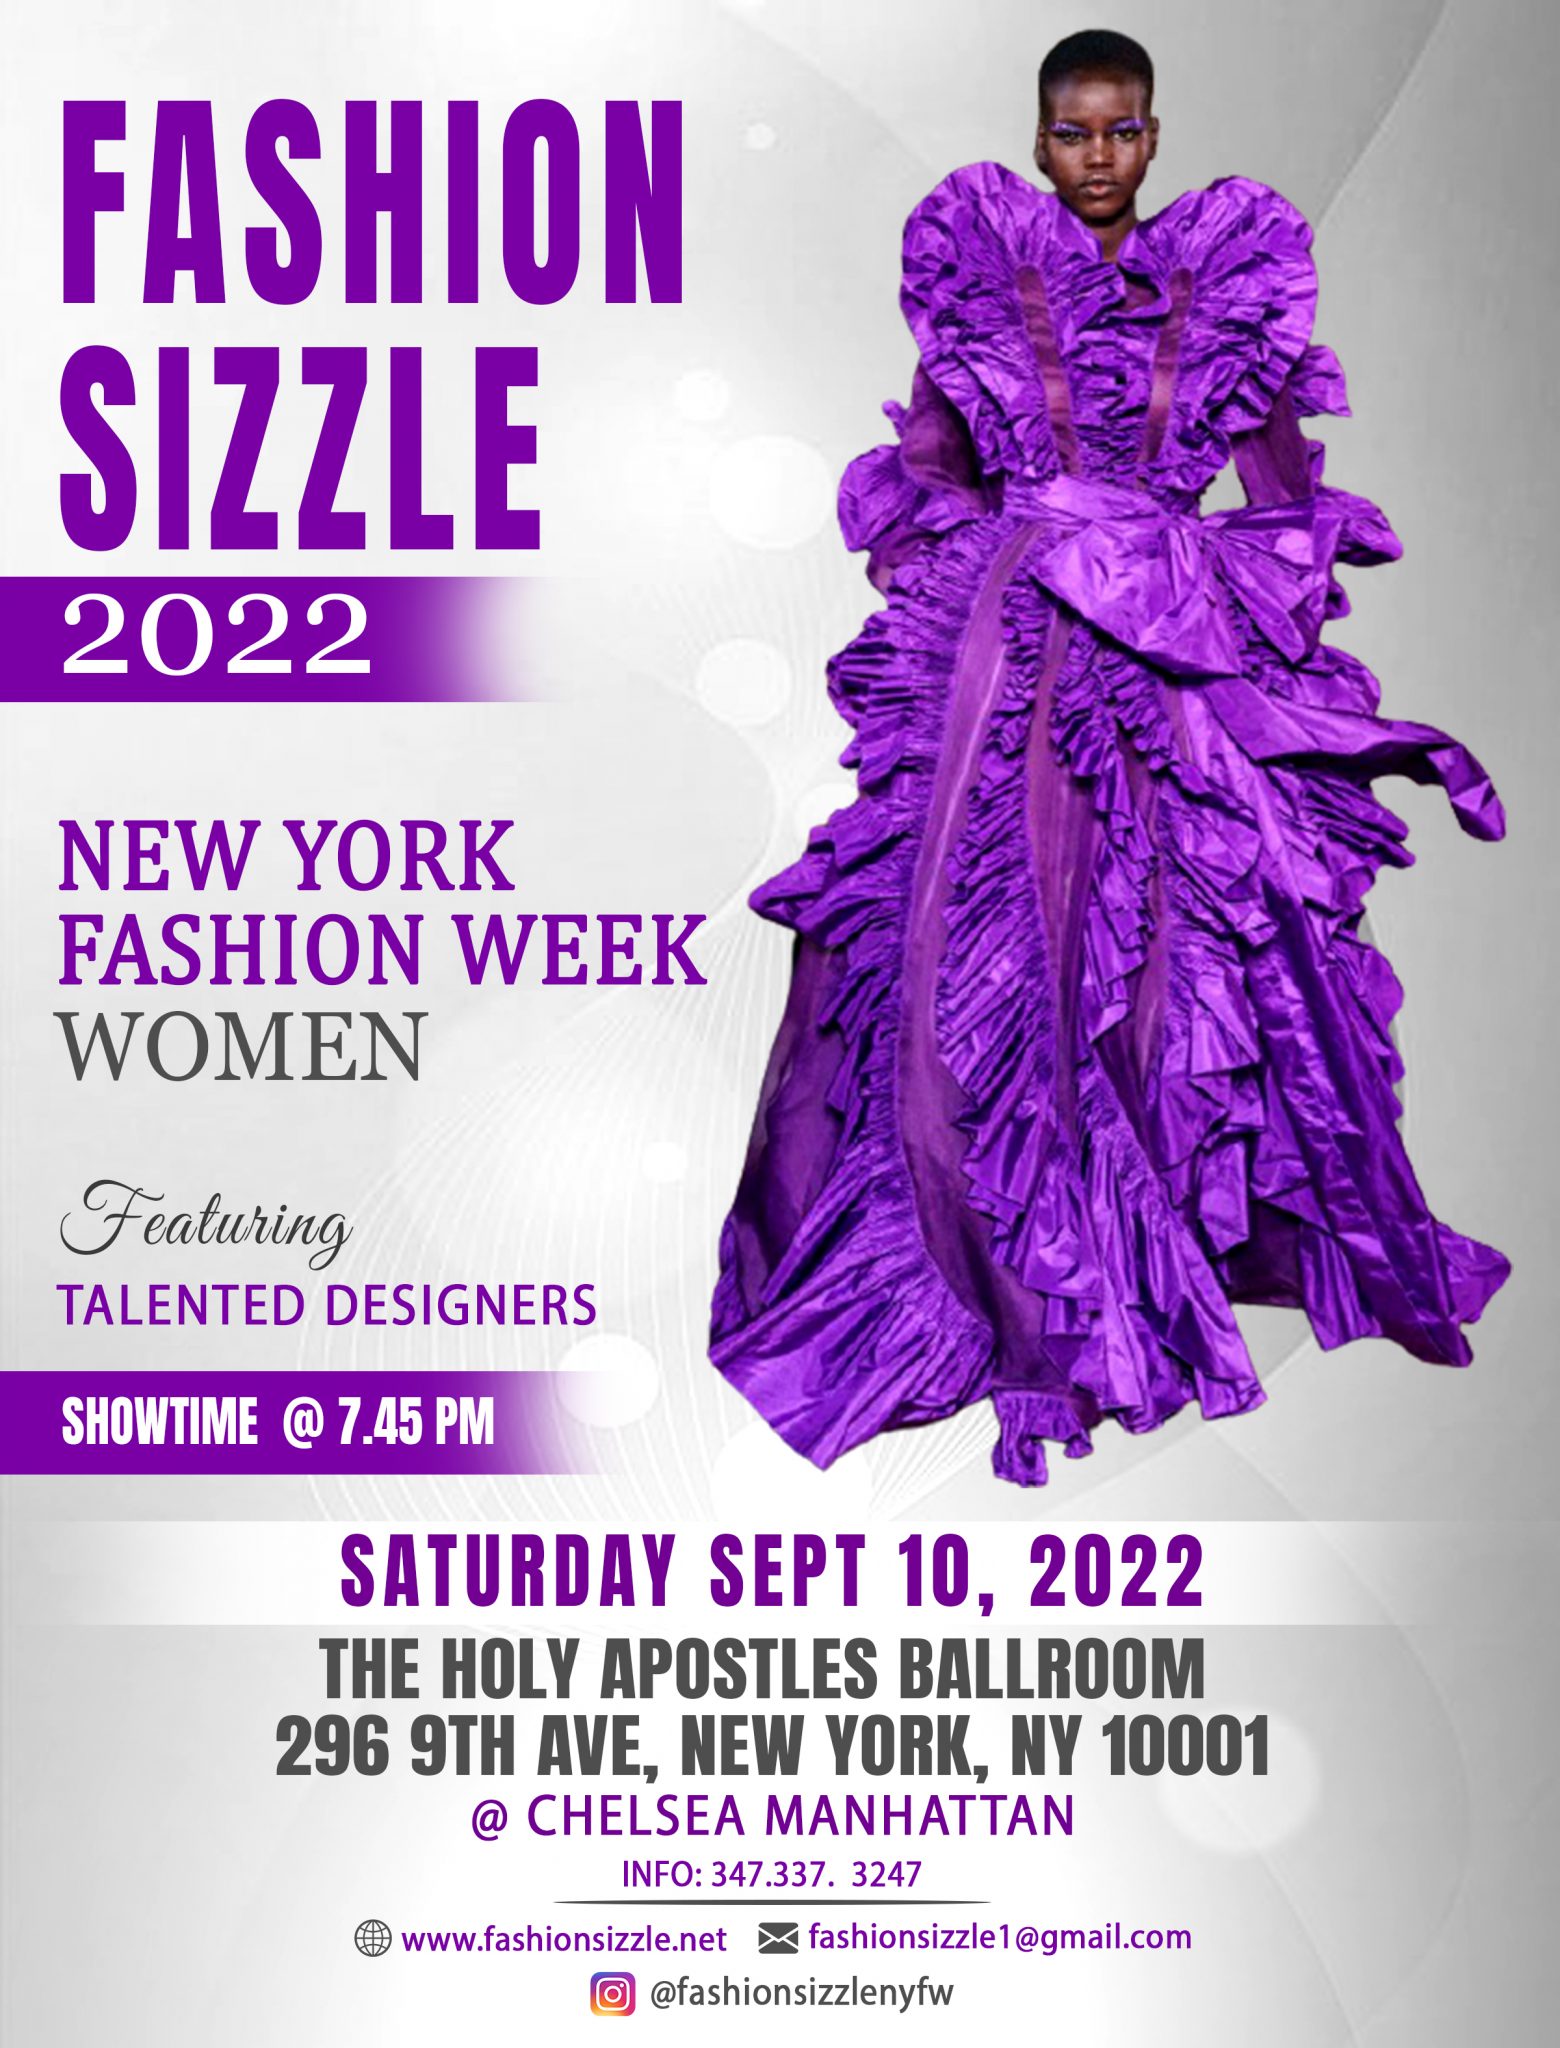 boutique-new-york-fashion-week-presented-by-fashion-sizzle-september-10-2022